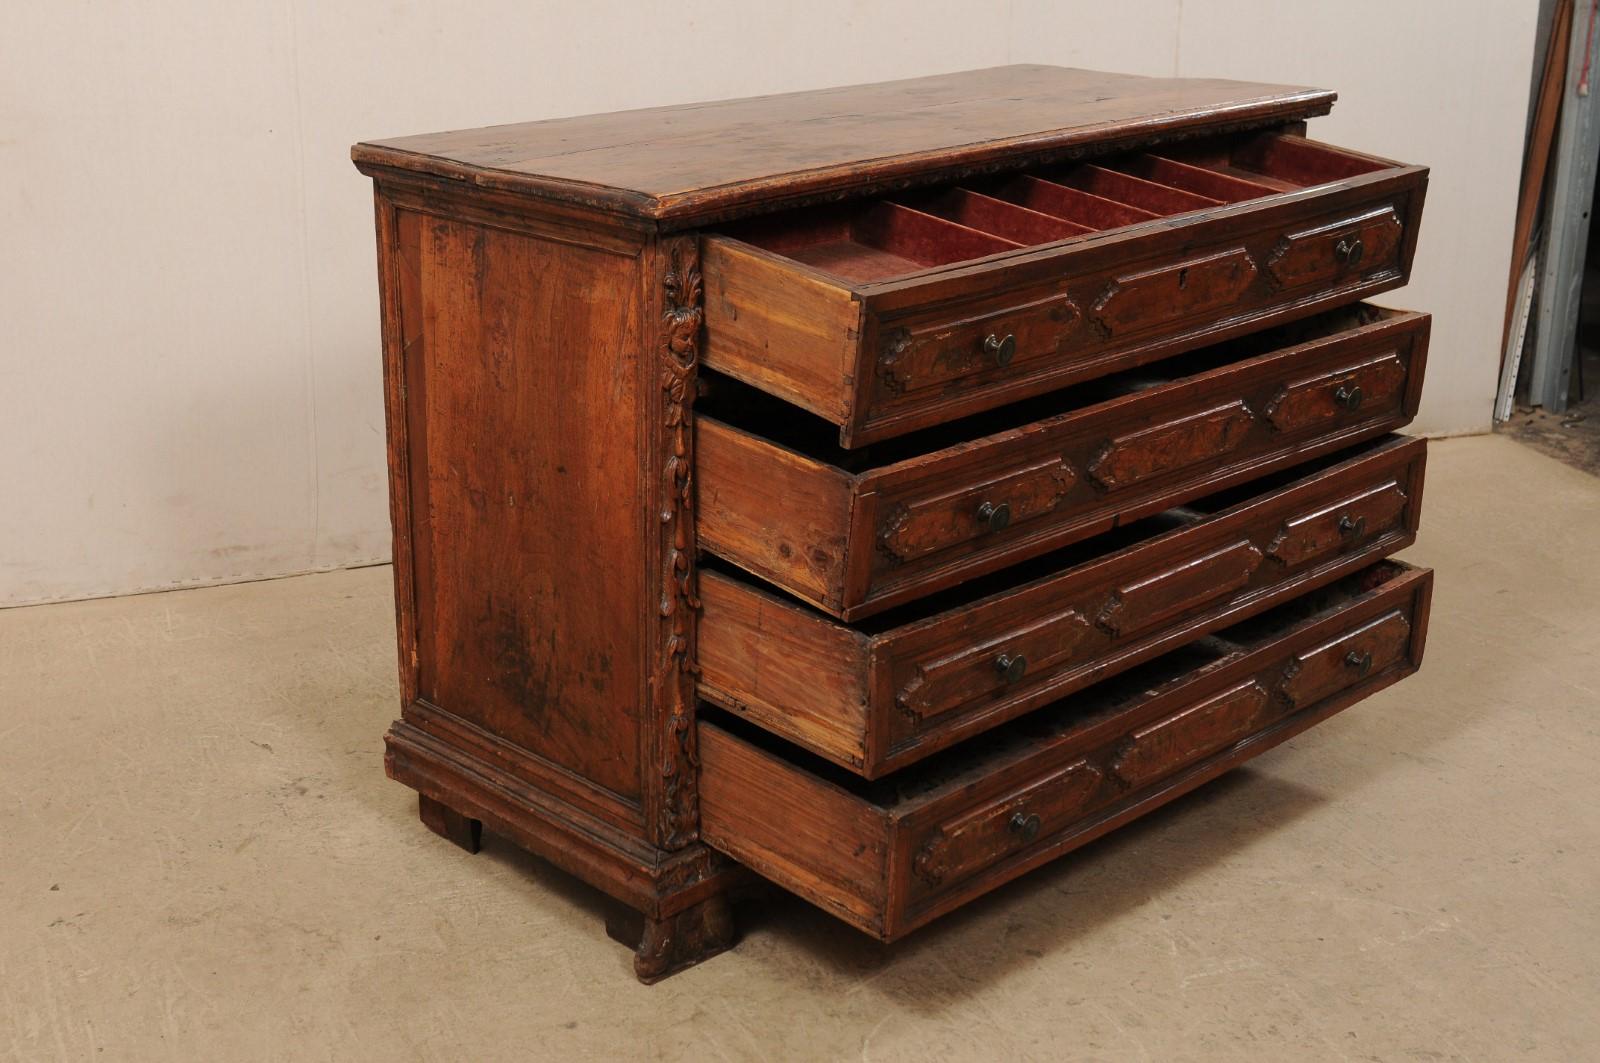 18th Century 4-Drawer Commode with Finely Carved Embellishments and Trimmings In Good Condition For Sale In Atlanta, GA